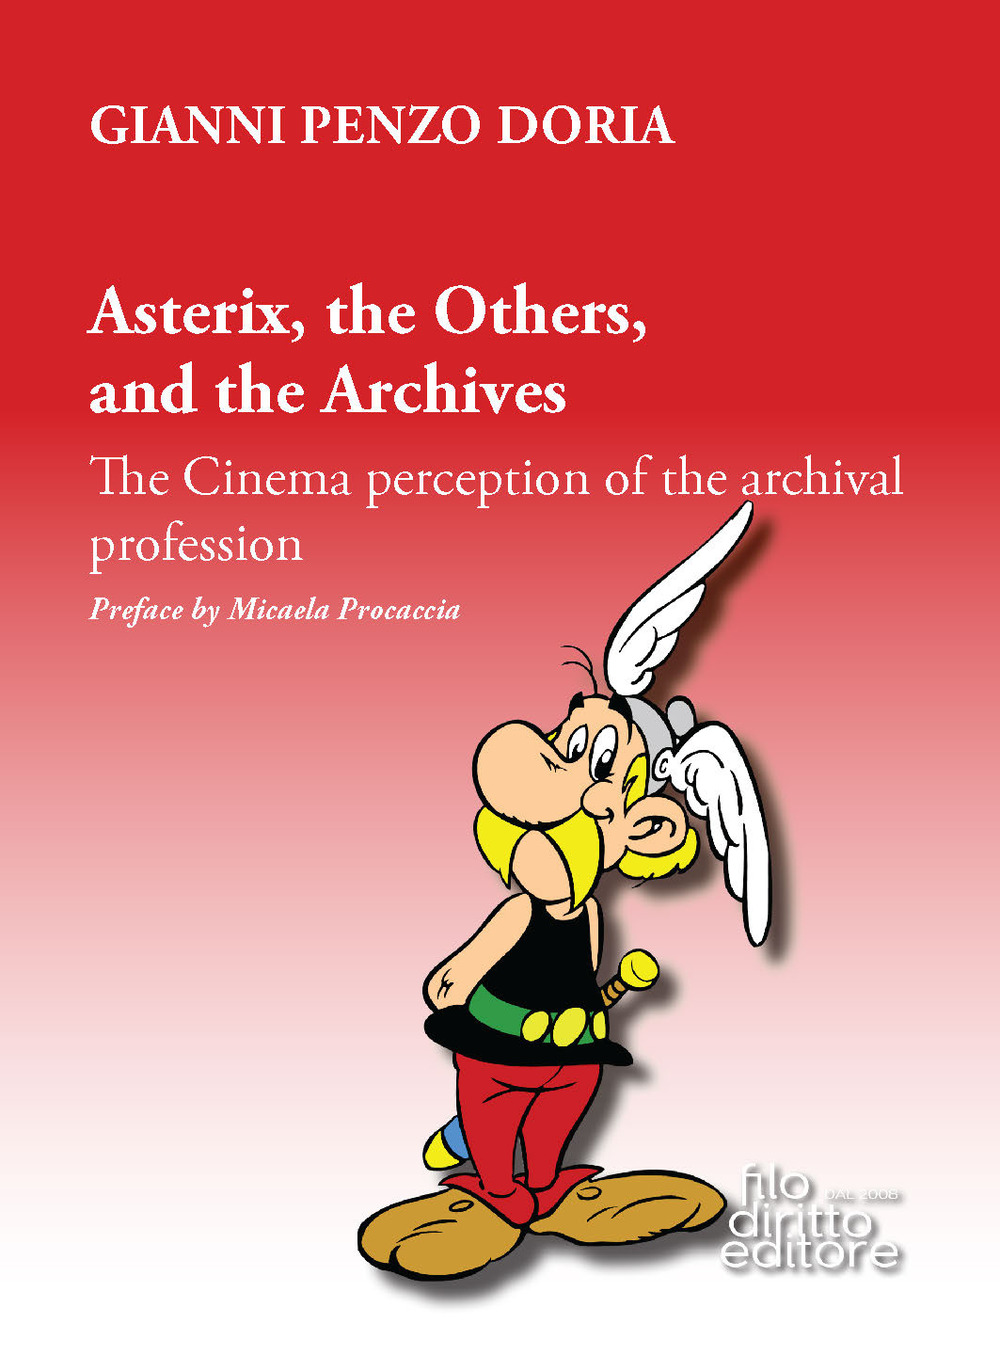 Asterix, the Others, and the Archives. The Cinema perception of the archival profession